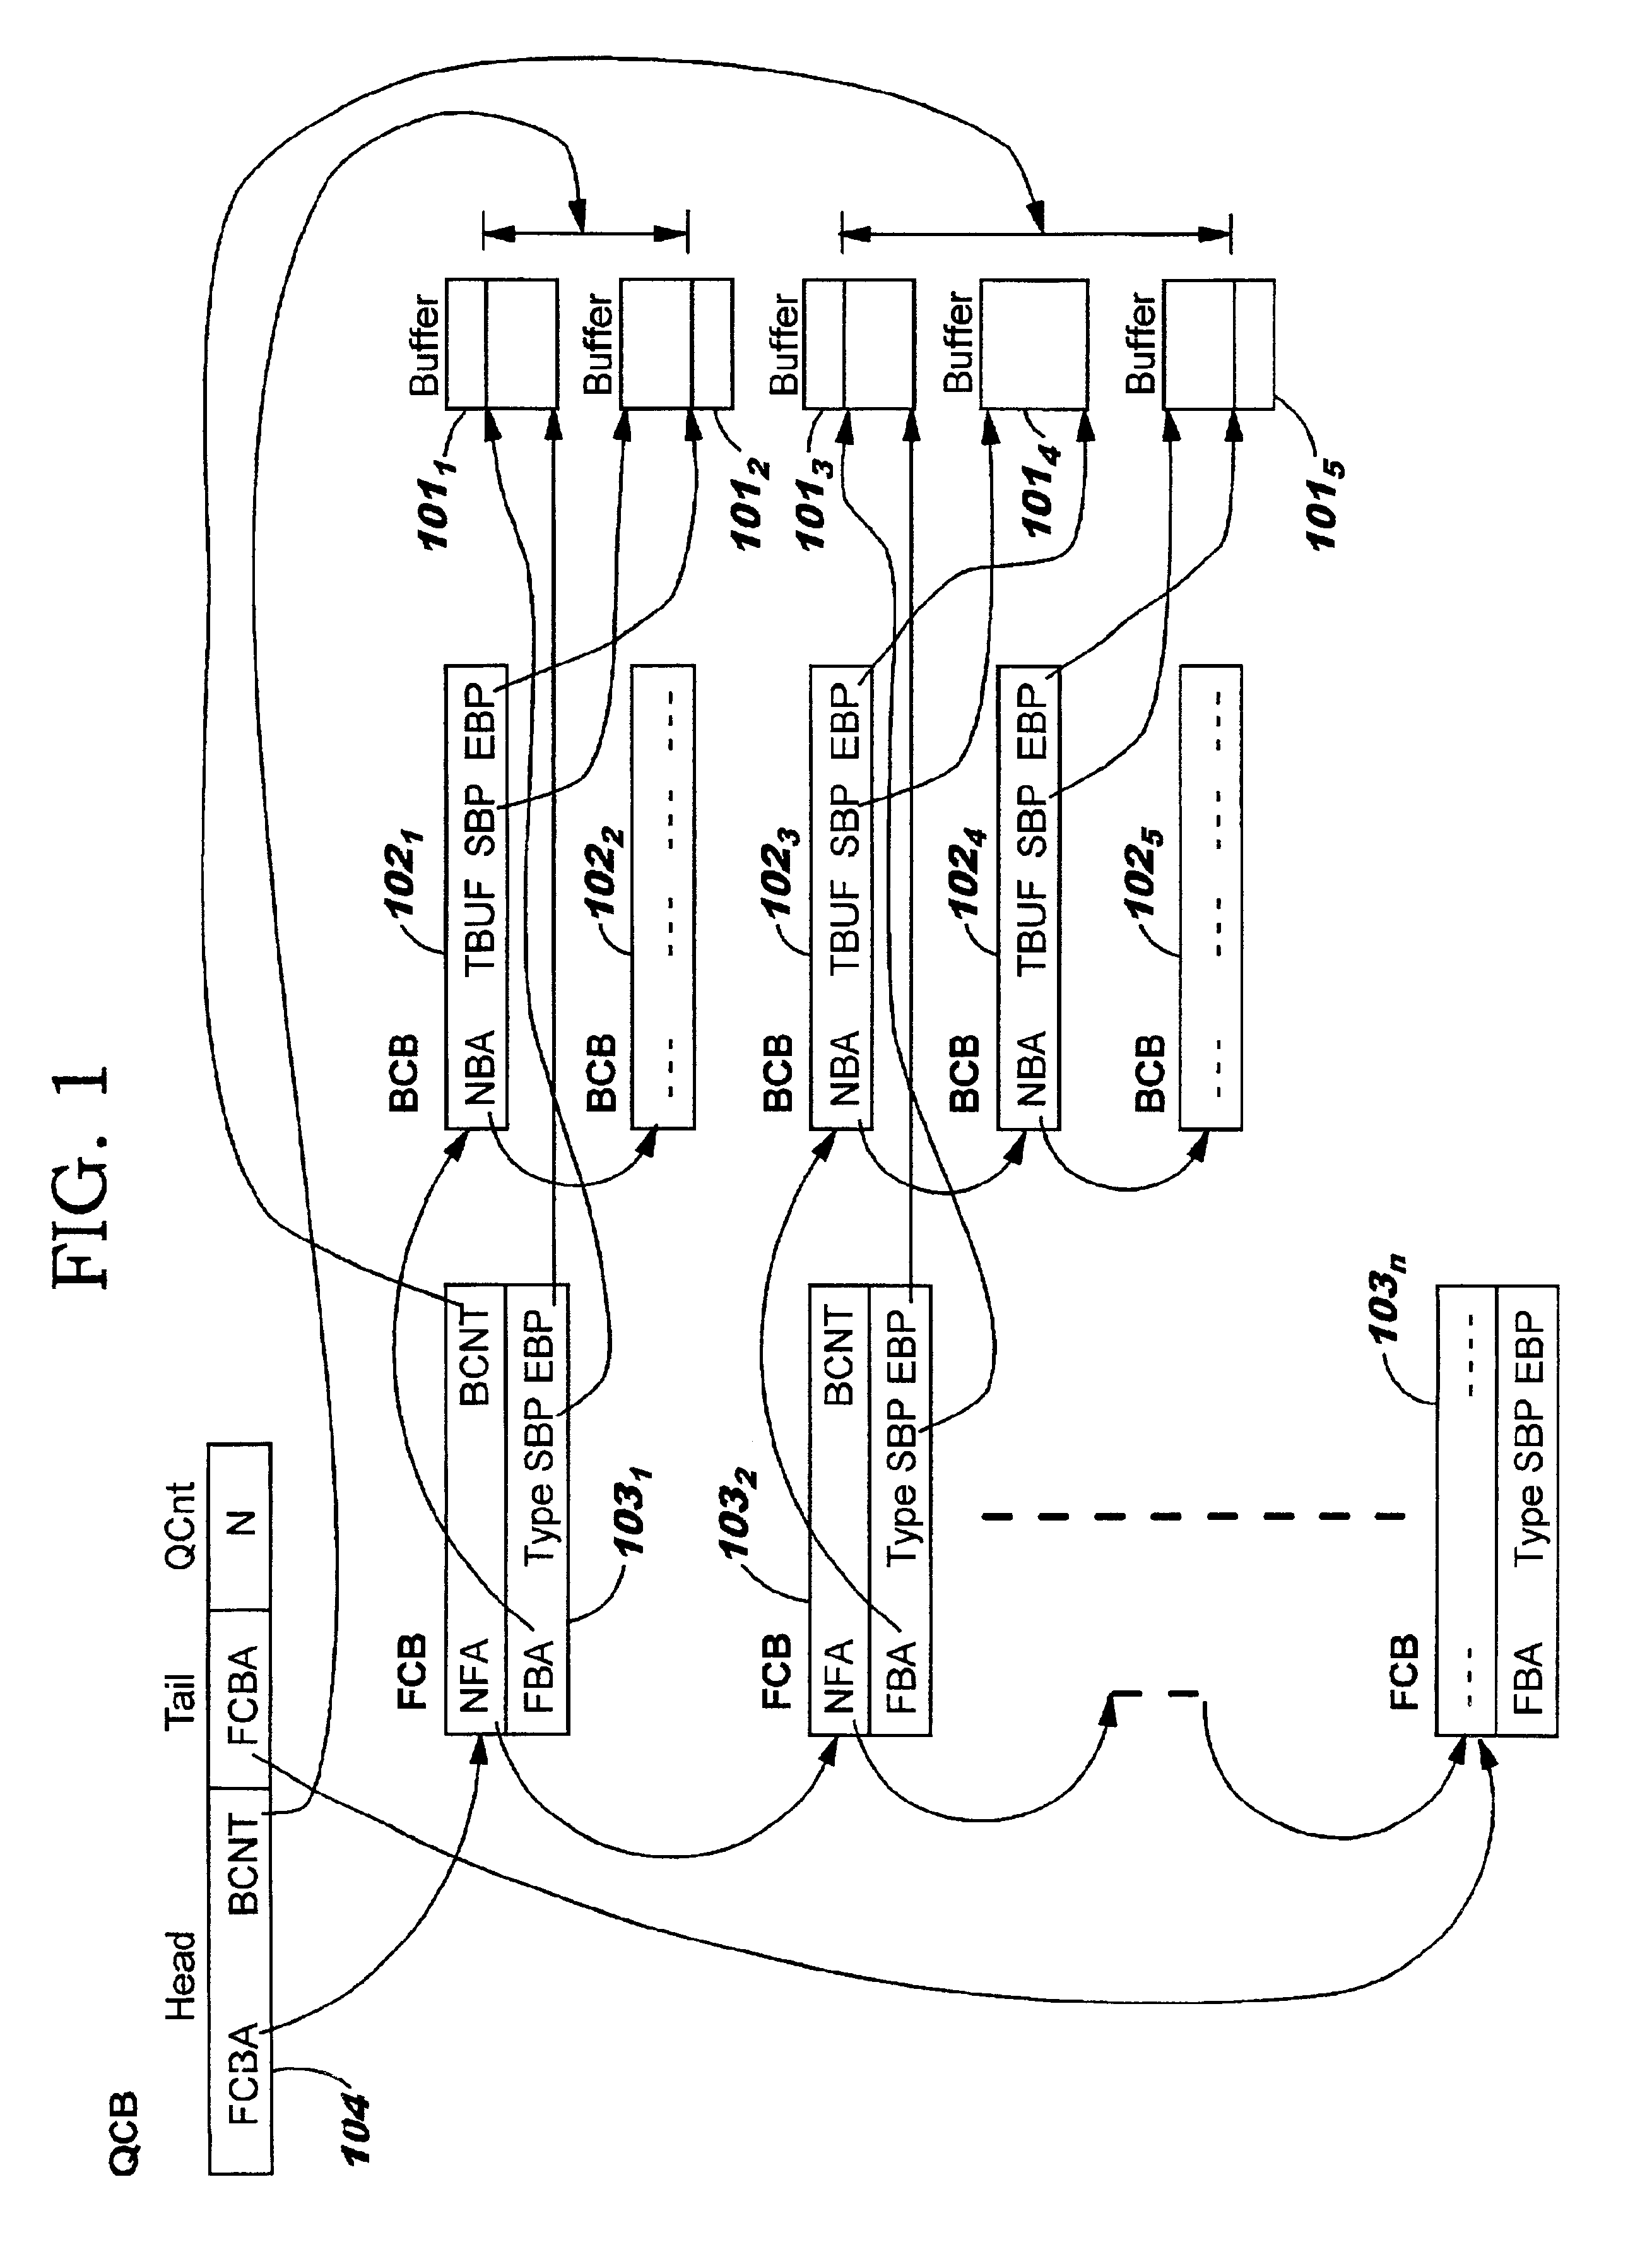 Data structures for efficient processing of multicast transmissions